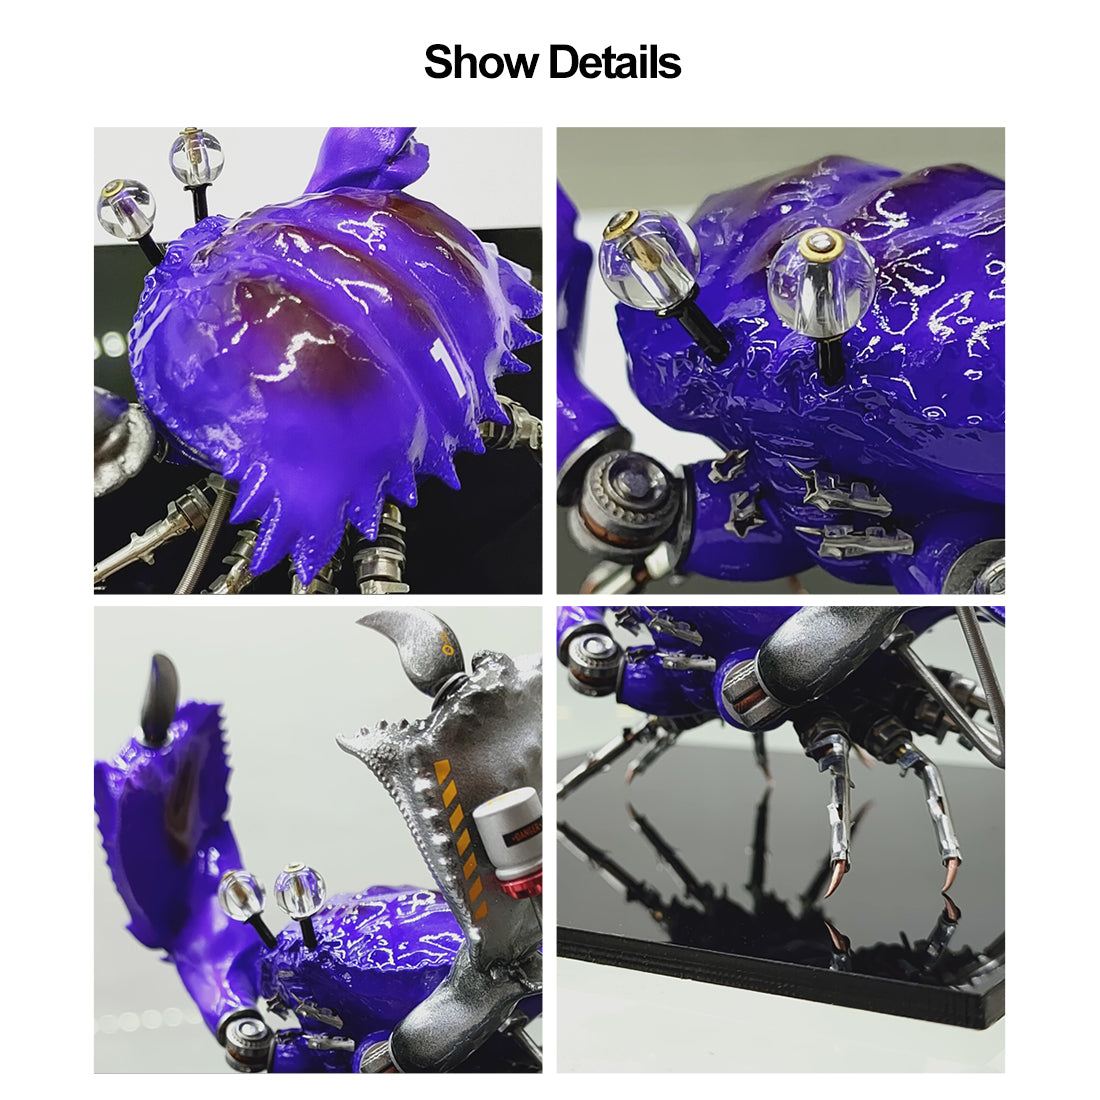 Punk Style 3D Purple Vampire Crab Model Crafts Collection- Finished Version